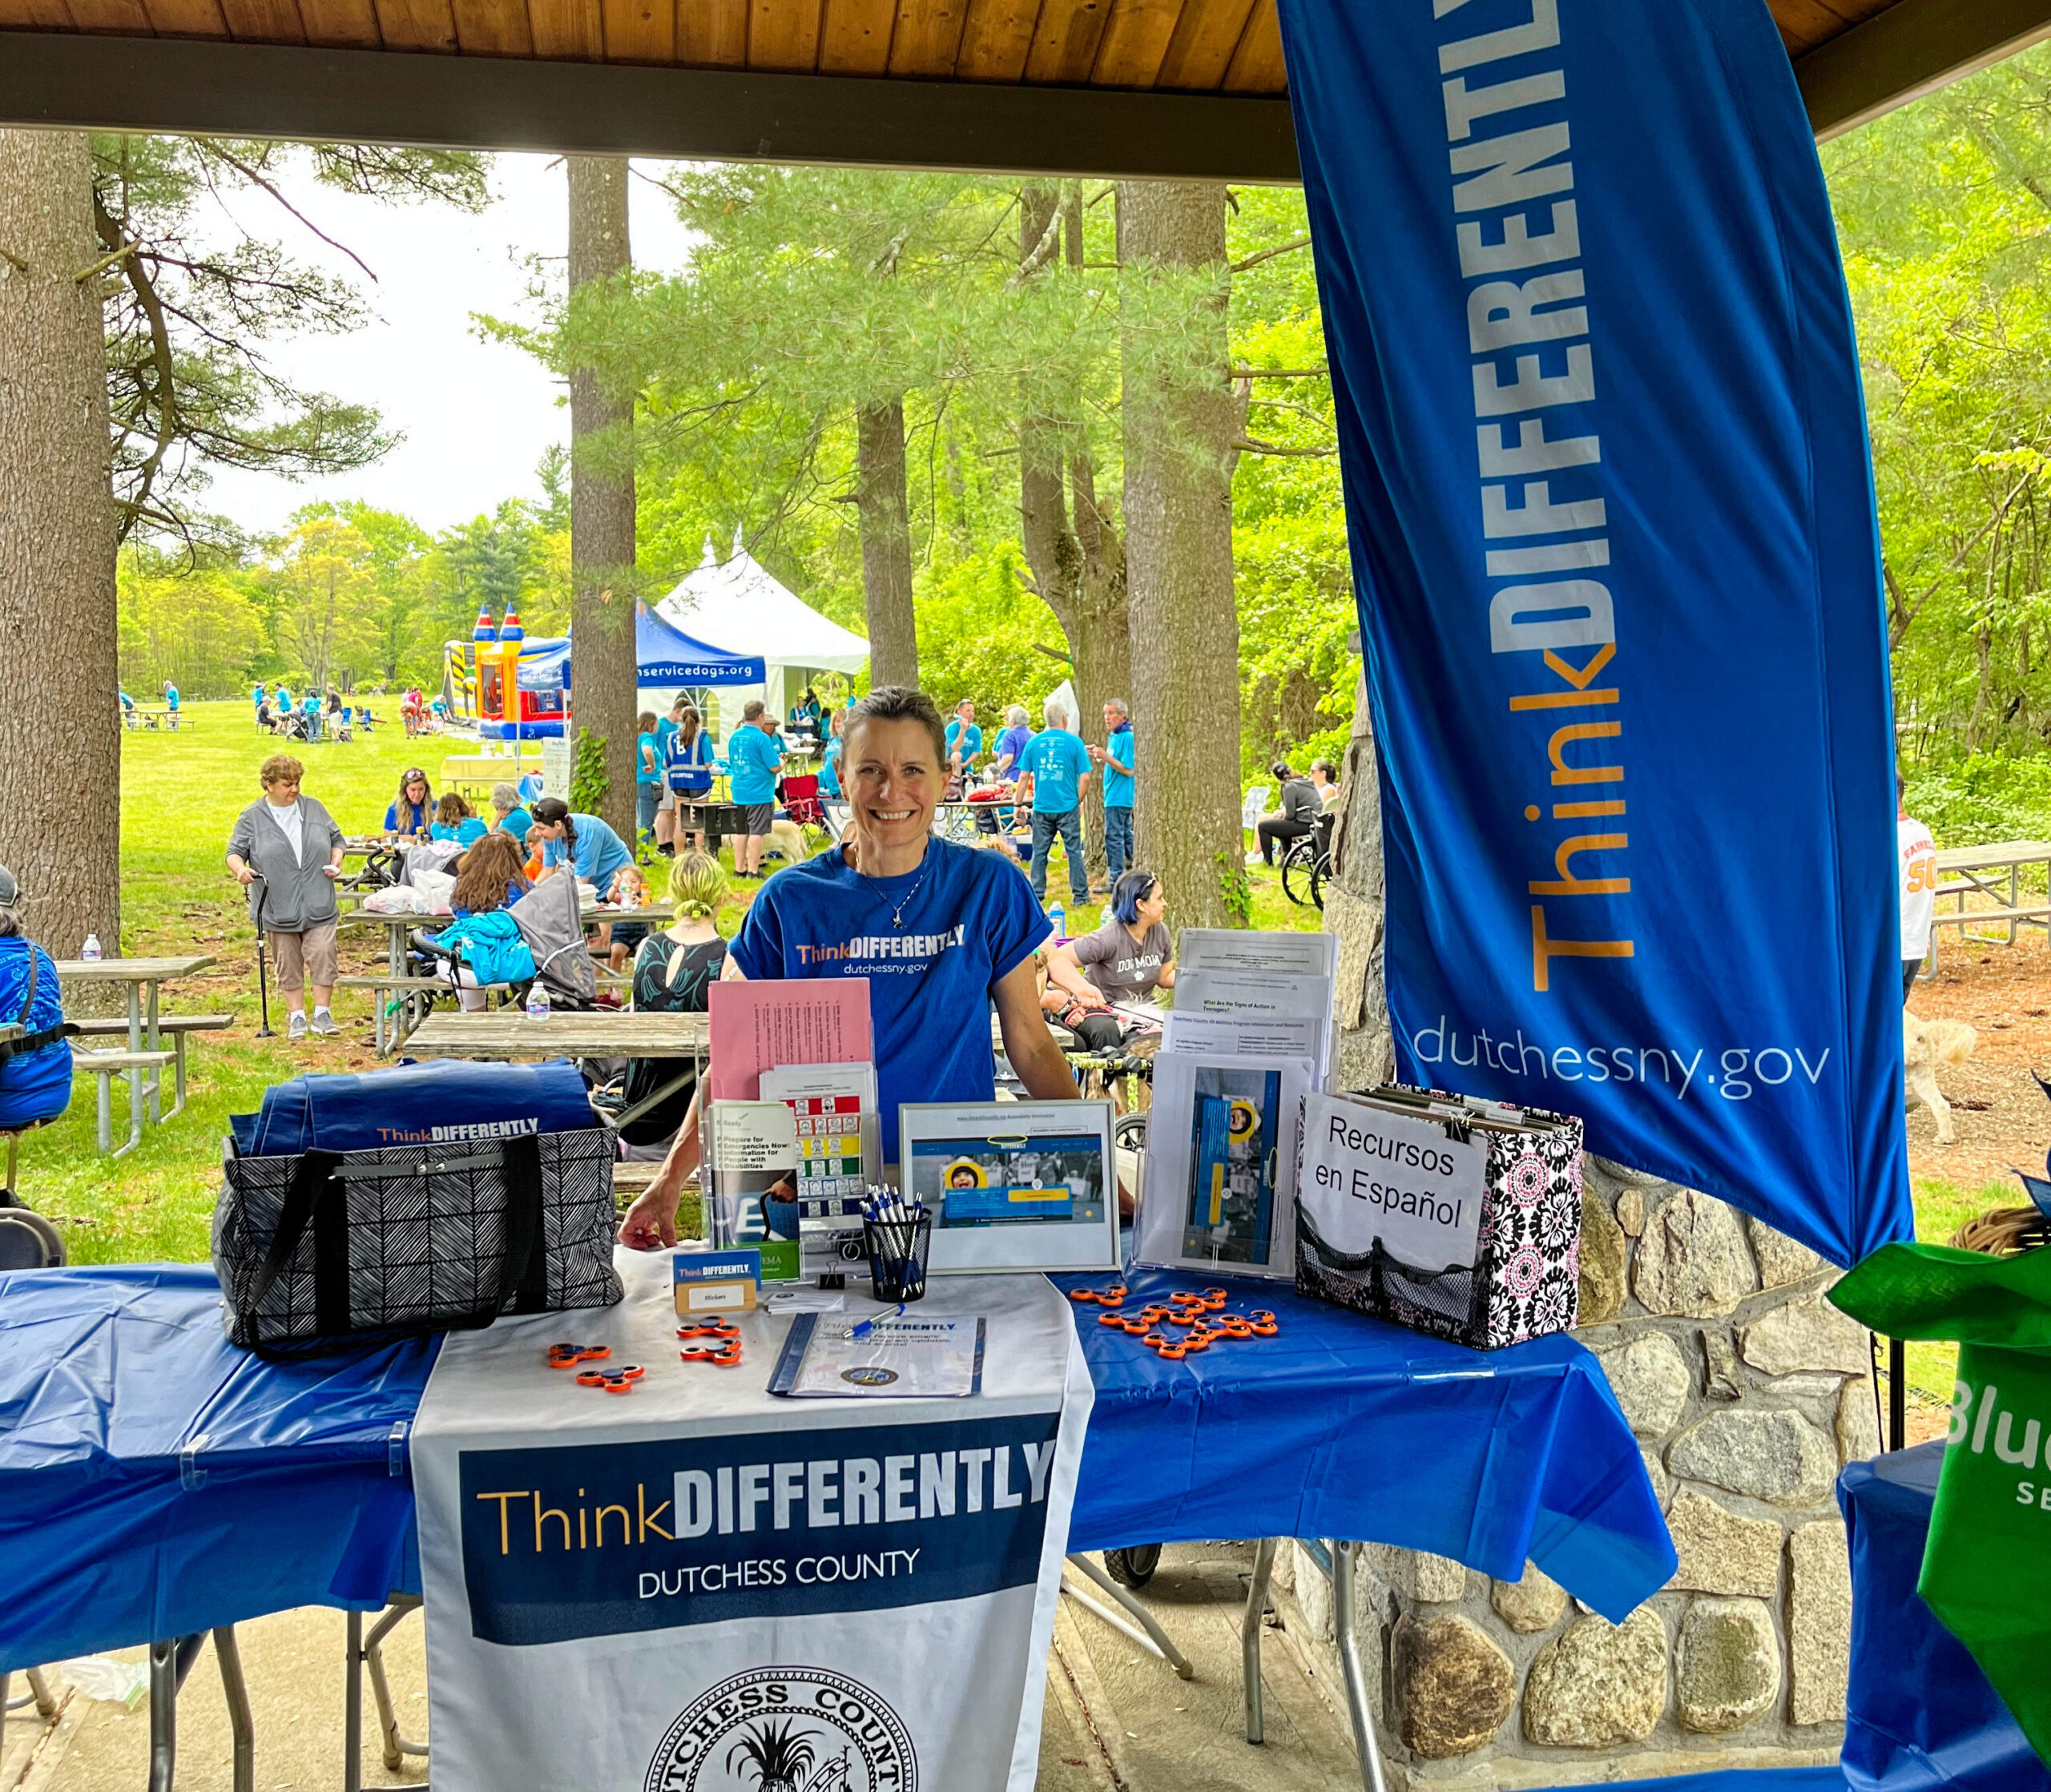 On May 13, 2023 BluePath Service Dogs held their Annual Walkathon at FDR Park in Yorktown. ThinkDIFFERENTLY was a sponsor and tabled at the event, which was attended by hundreds of people and maybe even more pups!! In this picture Dana Hopkins, Dutchess County All Abilities Program Director, is at the ThinkDIFFERENTLY table where she provided, information, resources, fidget spinners, and bags to the attendees, while making new connections and friends.